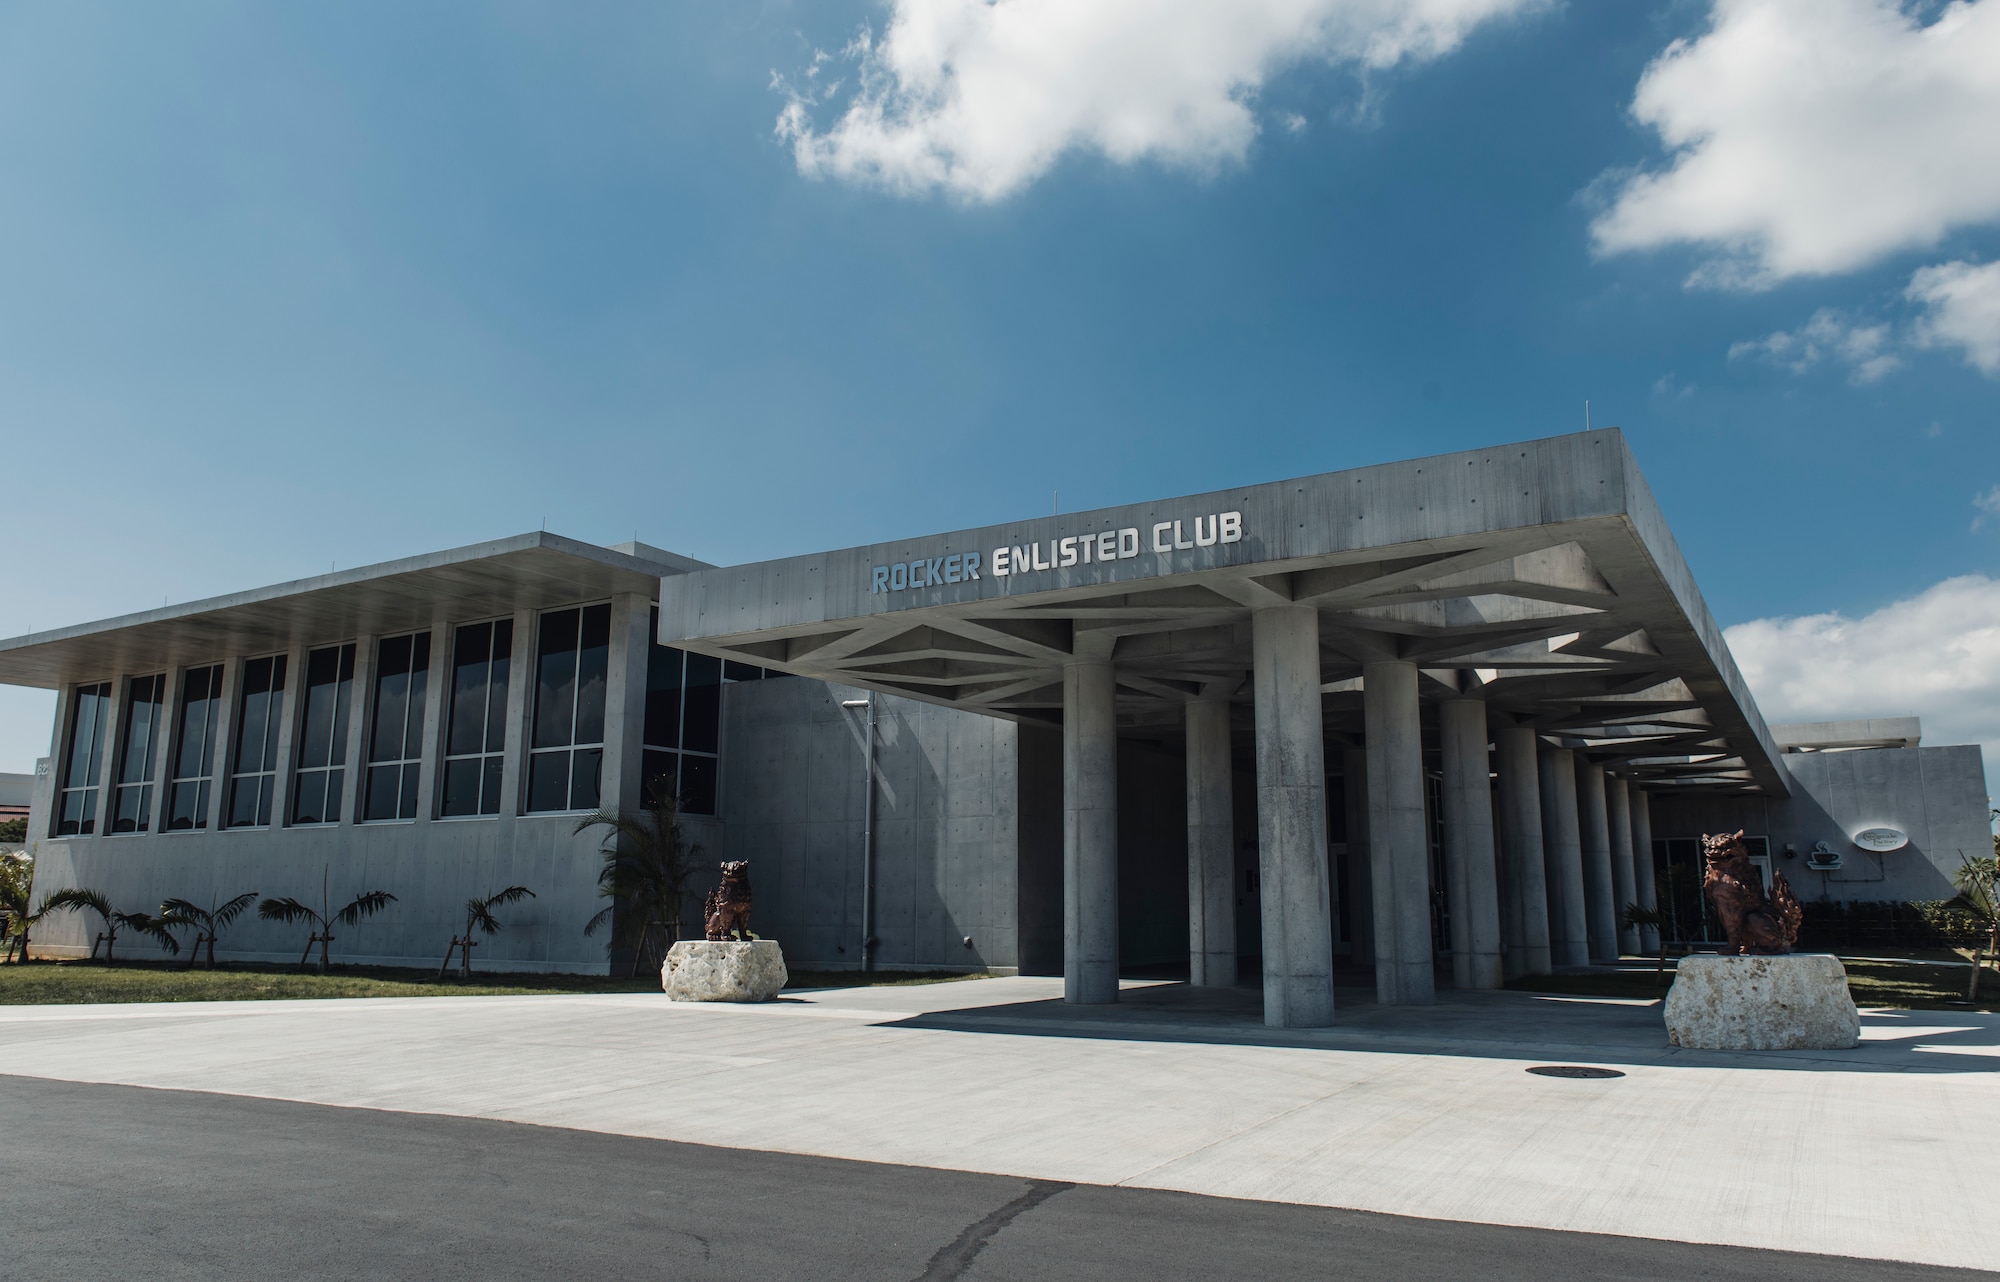 The Rocker Enlisted Club opened its doors to the public May 4th, 2018, on Kadena Air Base, Japan. The original Rocker NCO club was built in the same location in 1957. (U.S. Air Force photo by Senior Airman Omari Bernard)